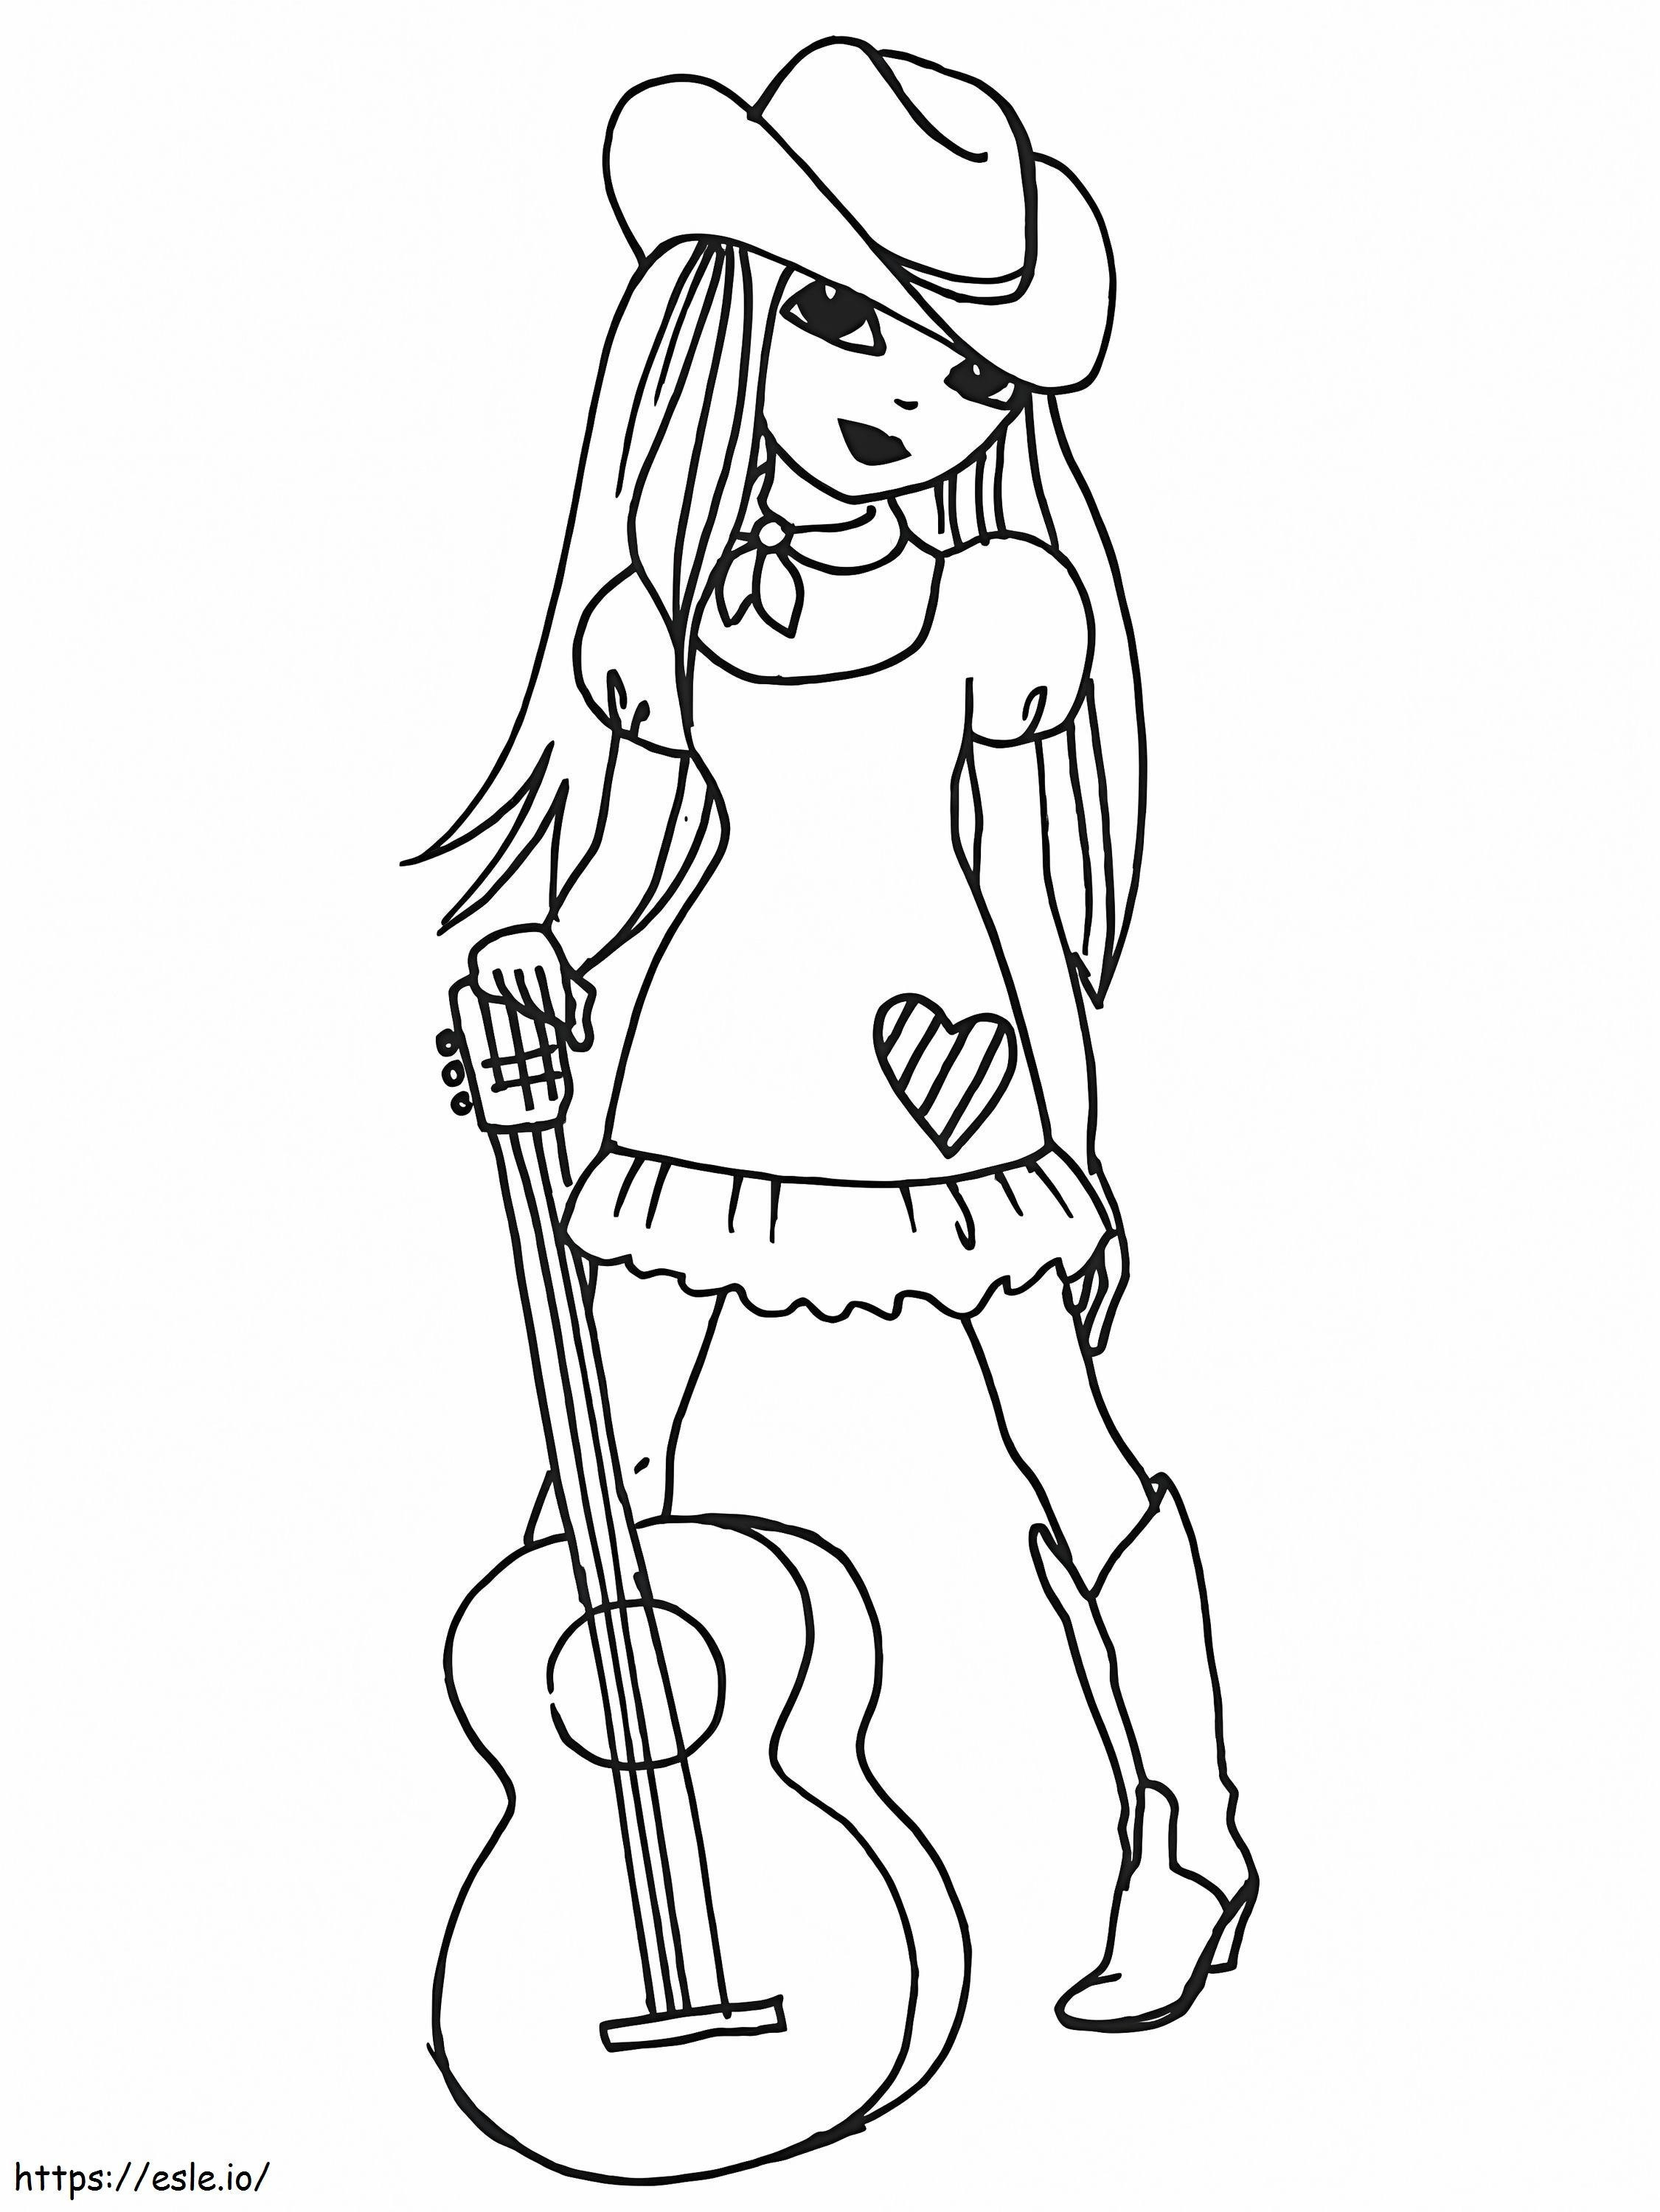 Cowgirl With Guitar coloring page